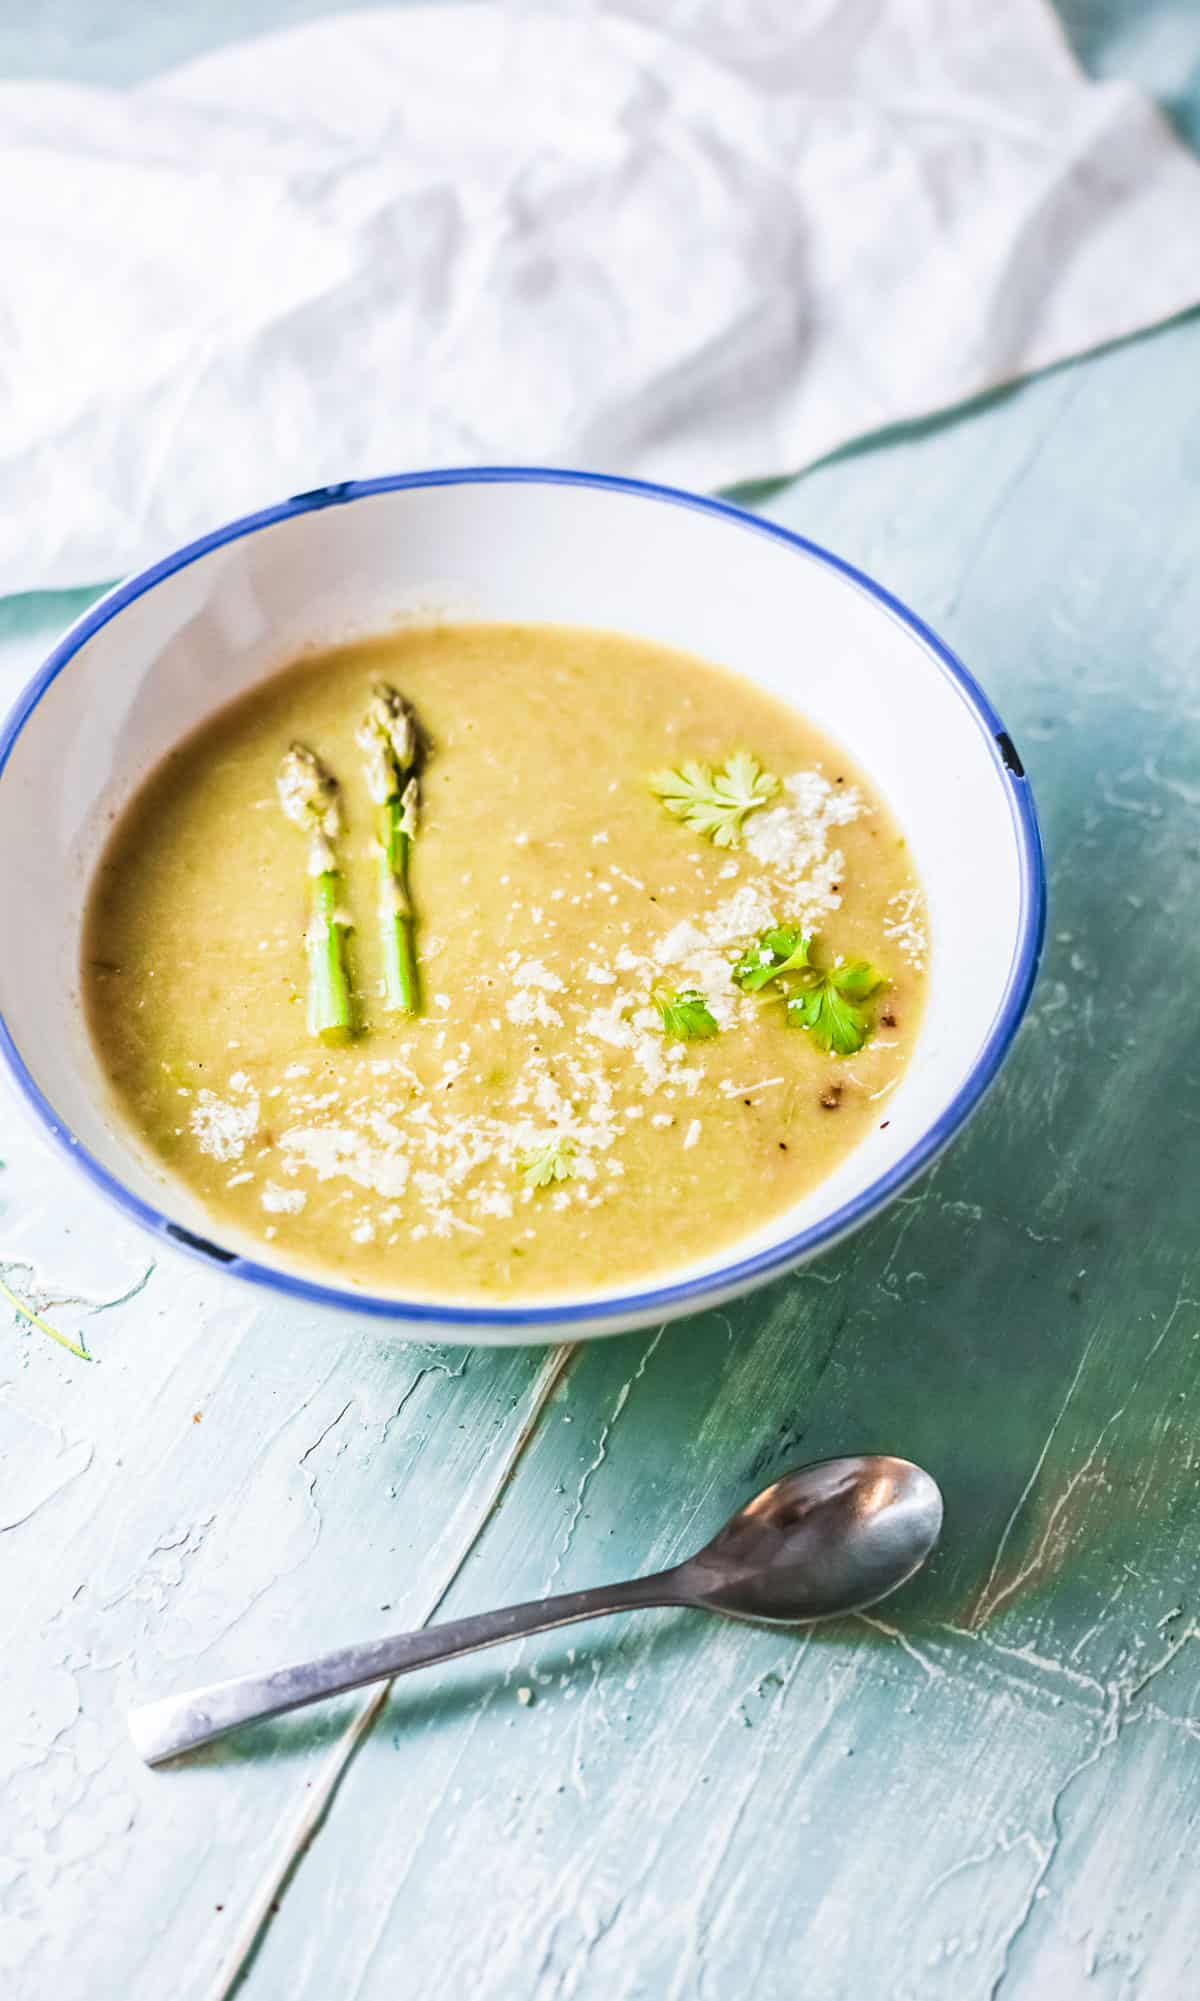 the completed asparagus soup instant pot recipe served in a ceramic bowl with a spoon